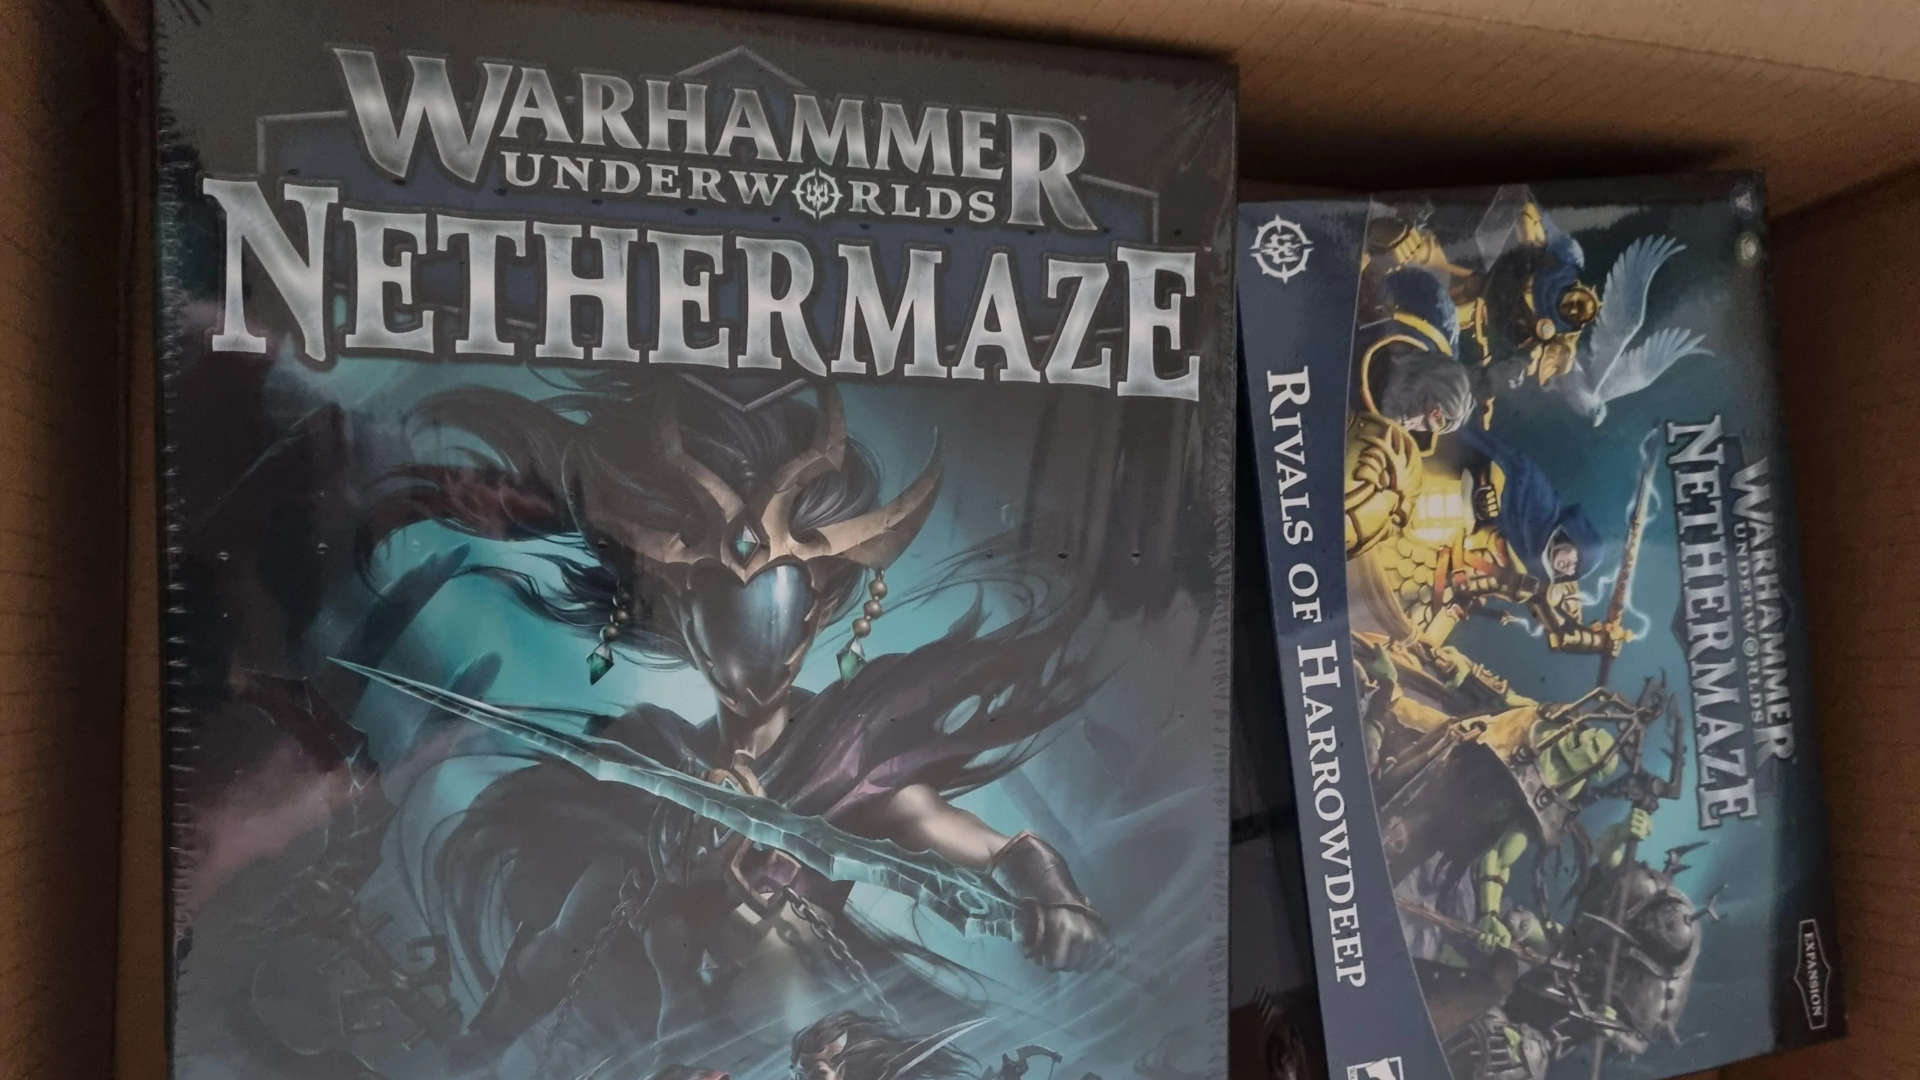 Warhammer 40k loot boxes landing - photograph of a pair of Warhammer Underworlds product boxes by redditor u/longshanksracey